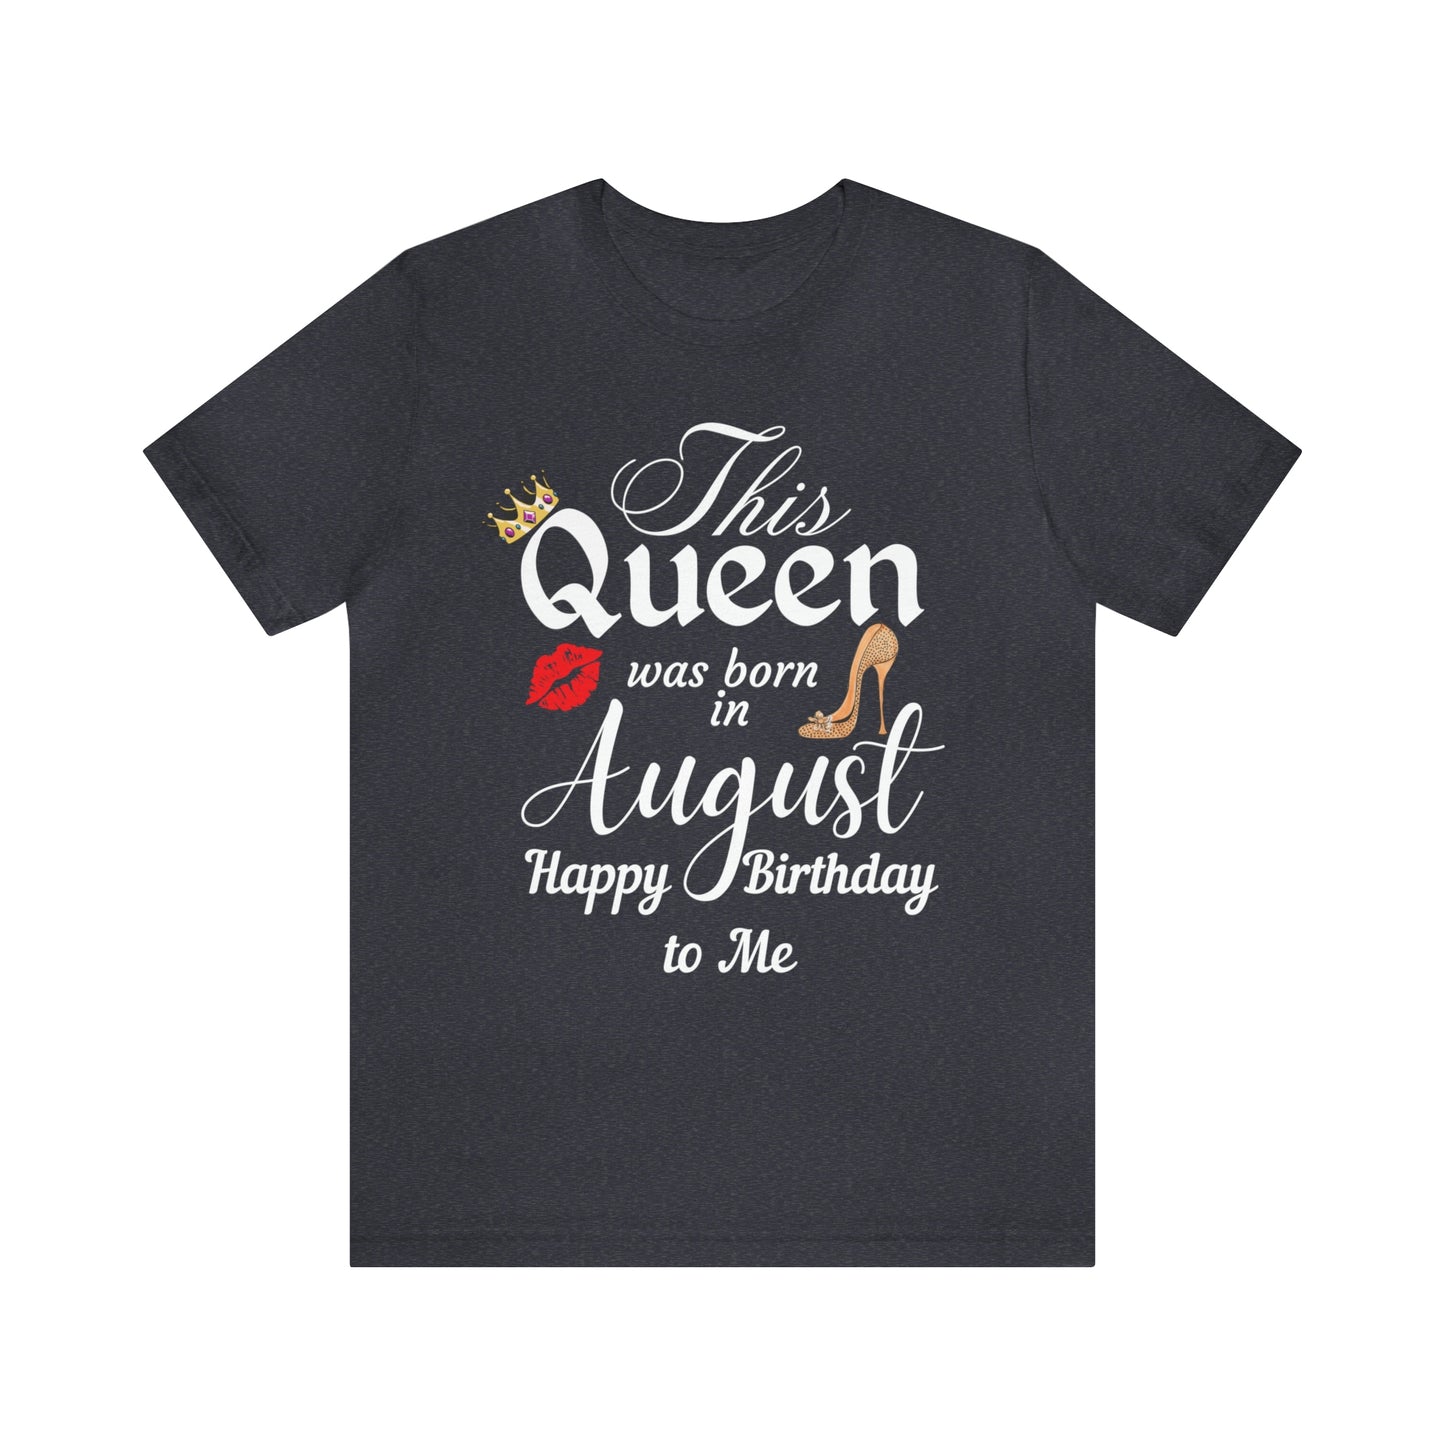 Birthday Queen Shirt, Gift for birthday, This Queen was born in August shirt, Funny Queen shirt, funny Birthday shirt, birthday gift